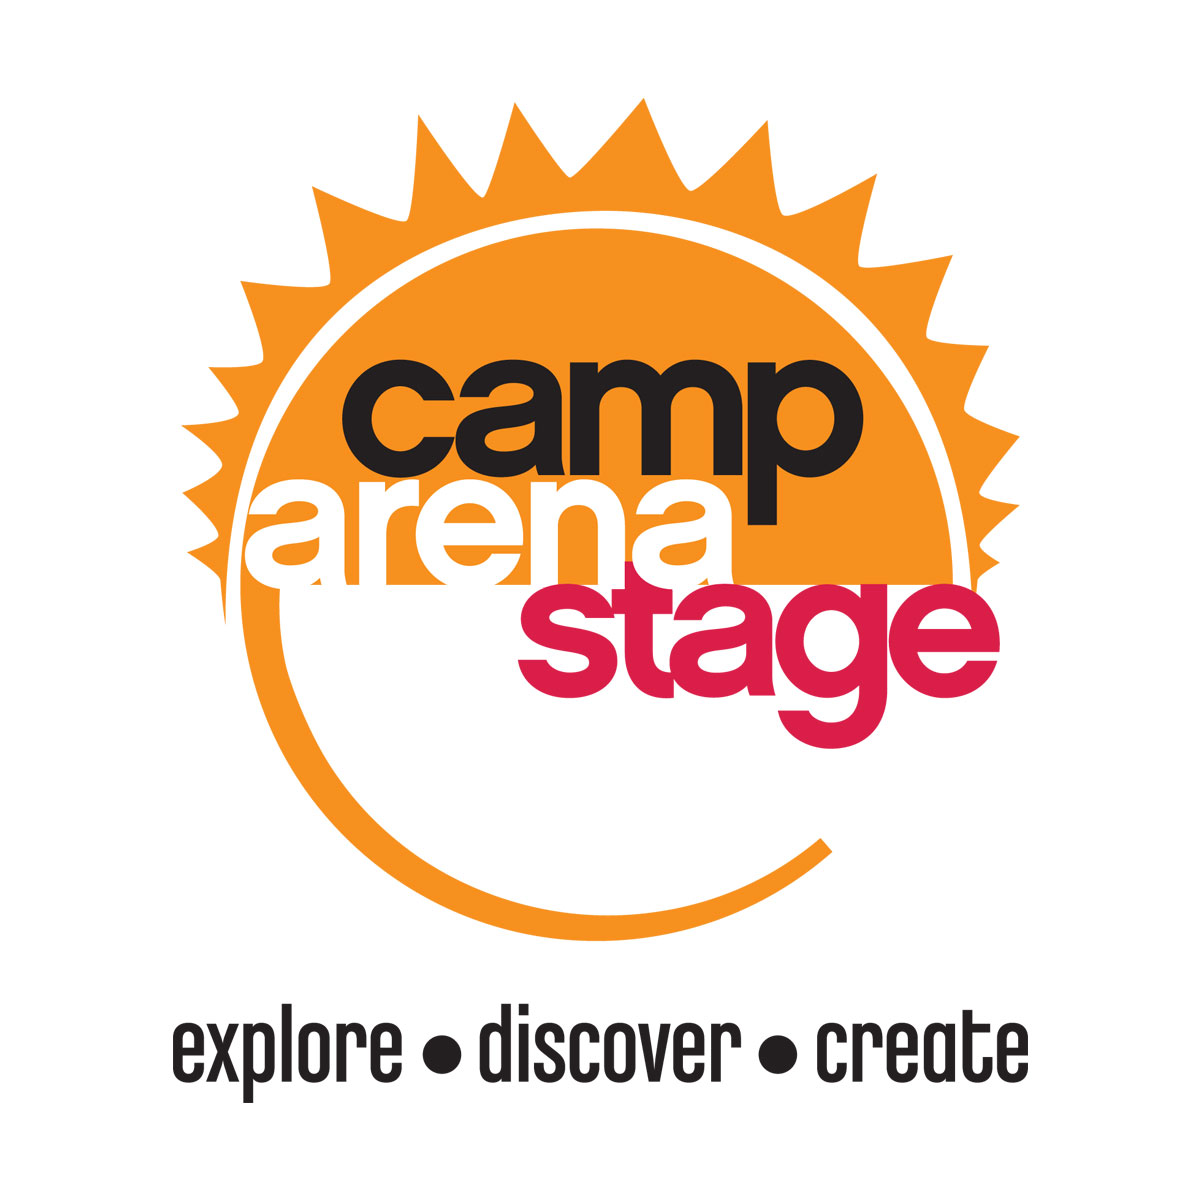 camp arena stage logo